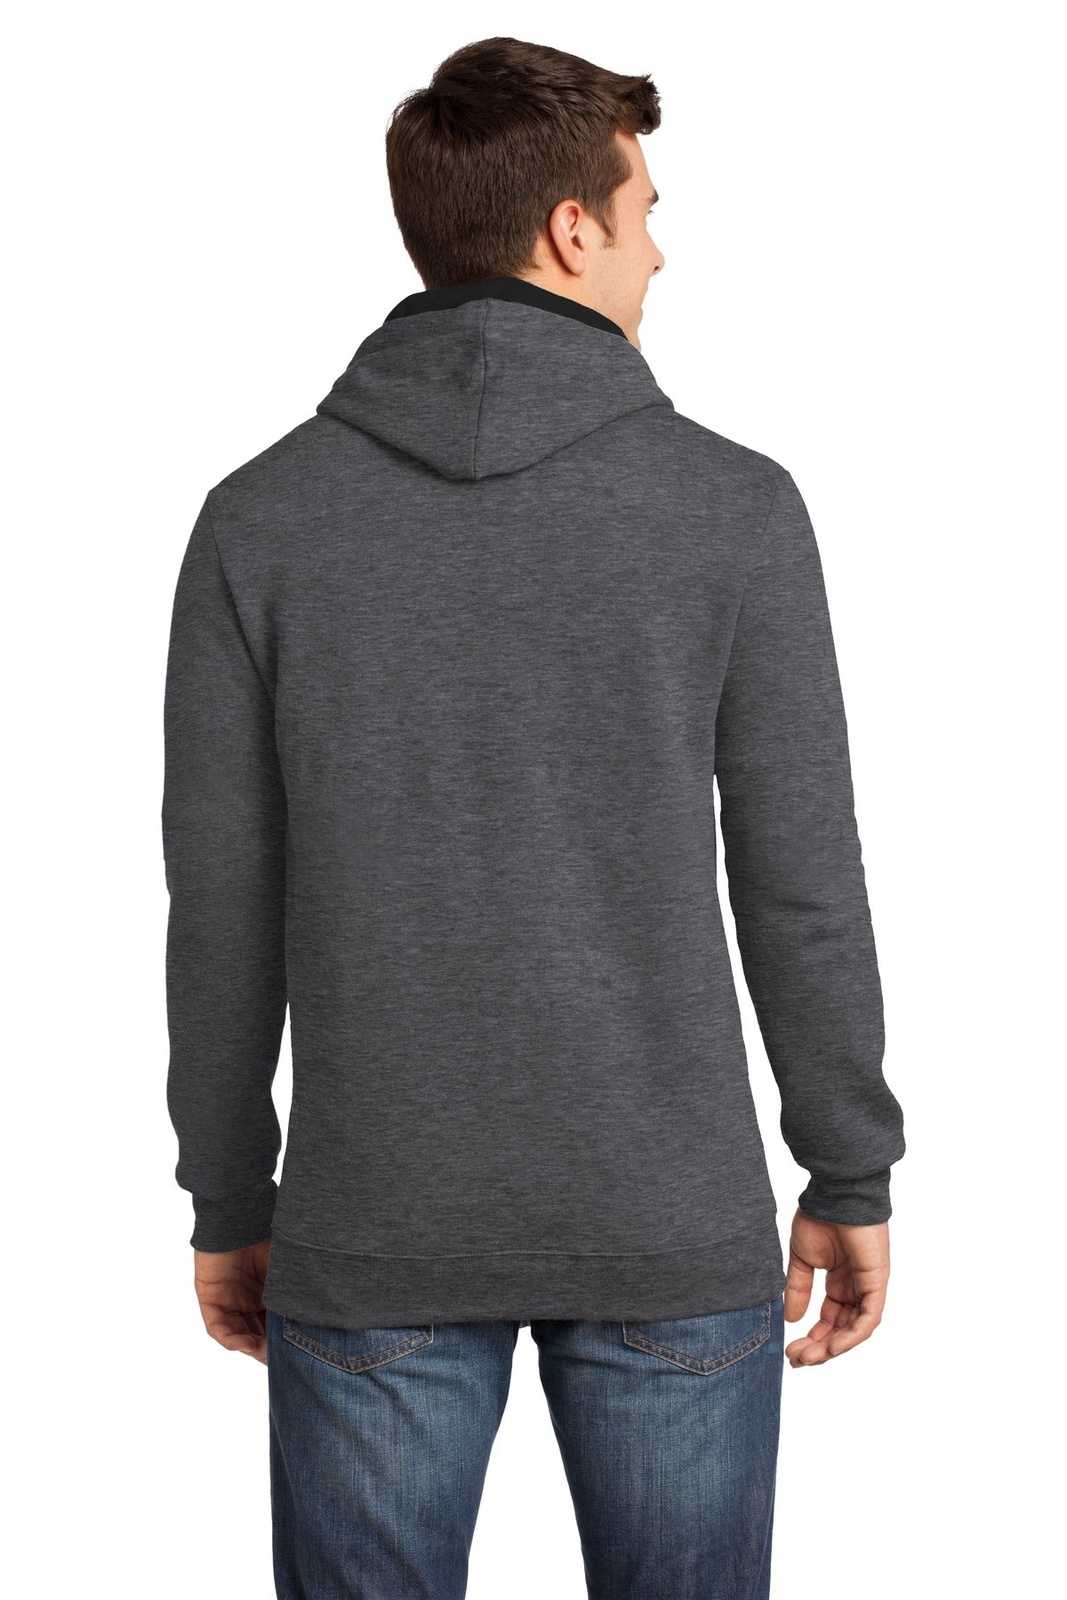 District DT810 The Concert Fleece Hoodie - Heathered Charcoal - HIT a Double - 1